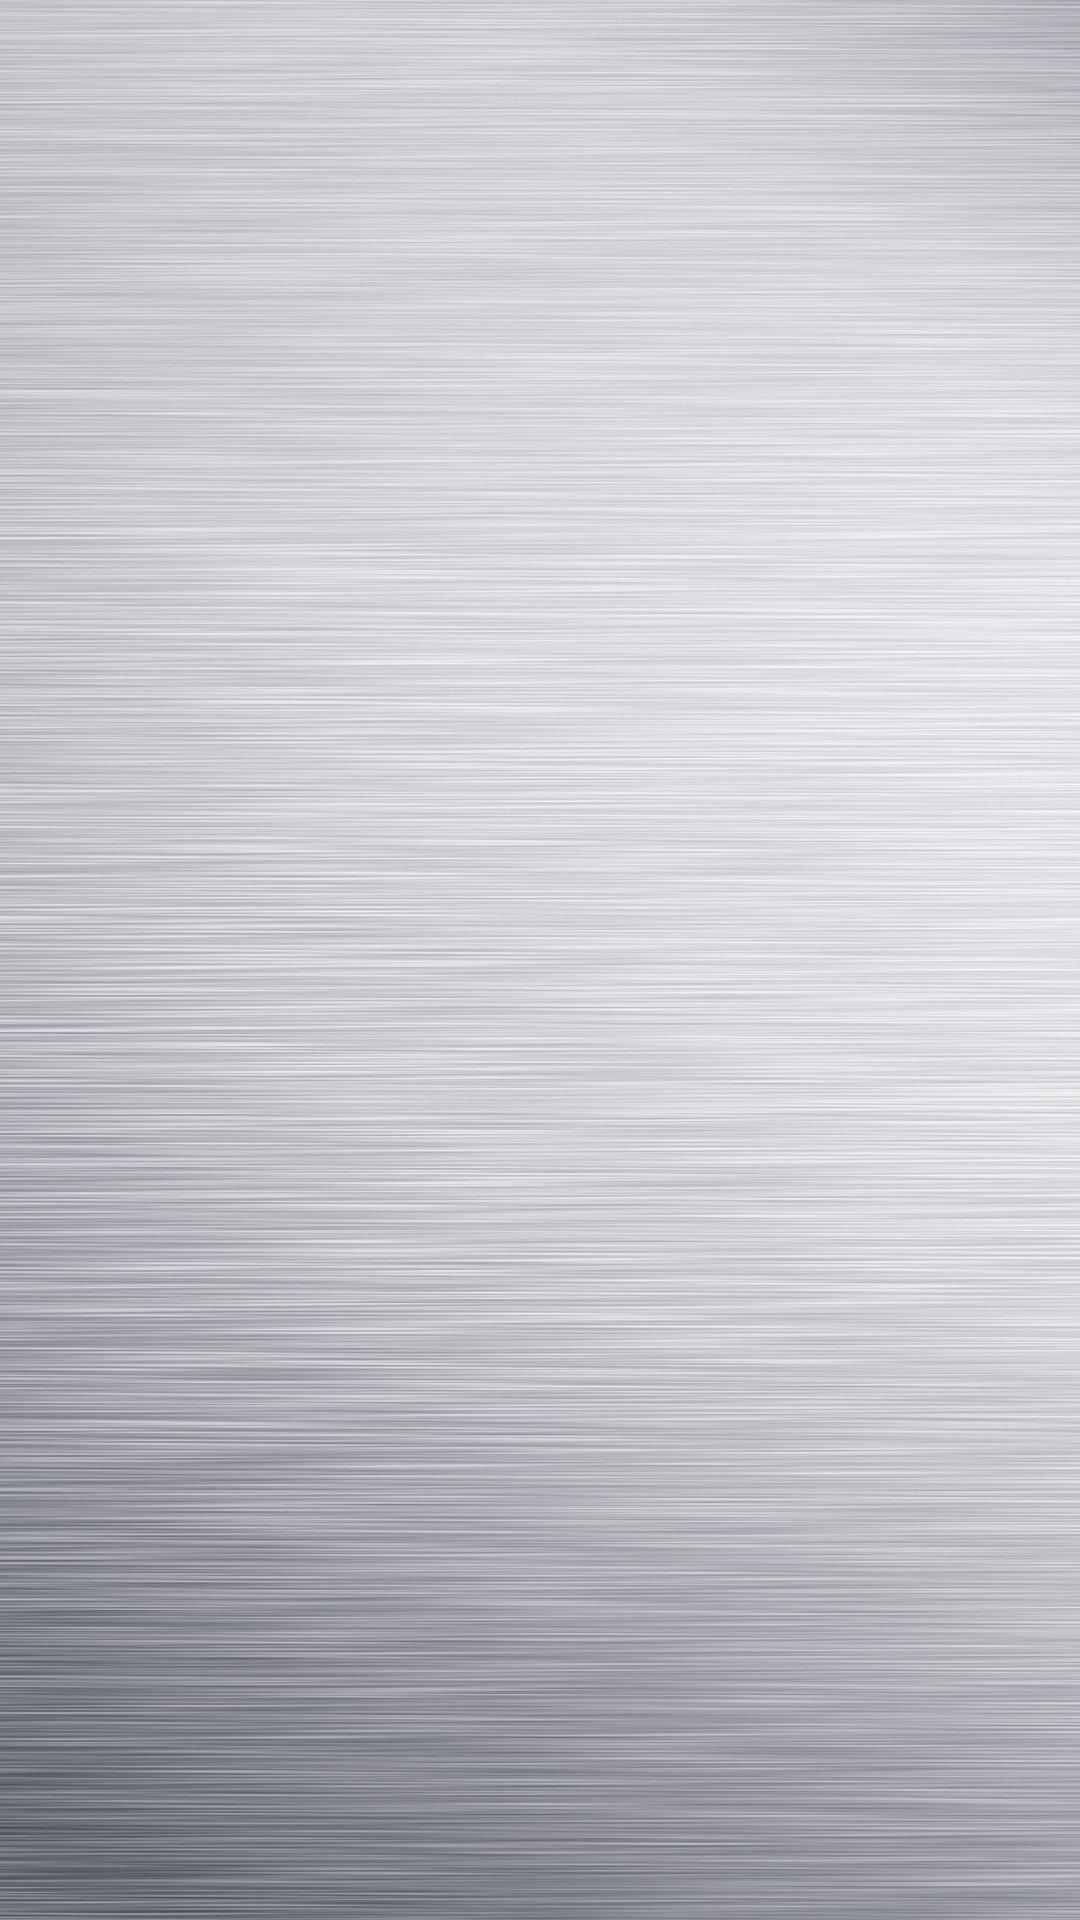 brushed metal background iphone